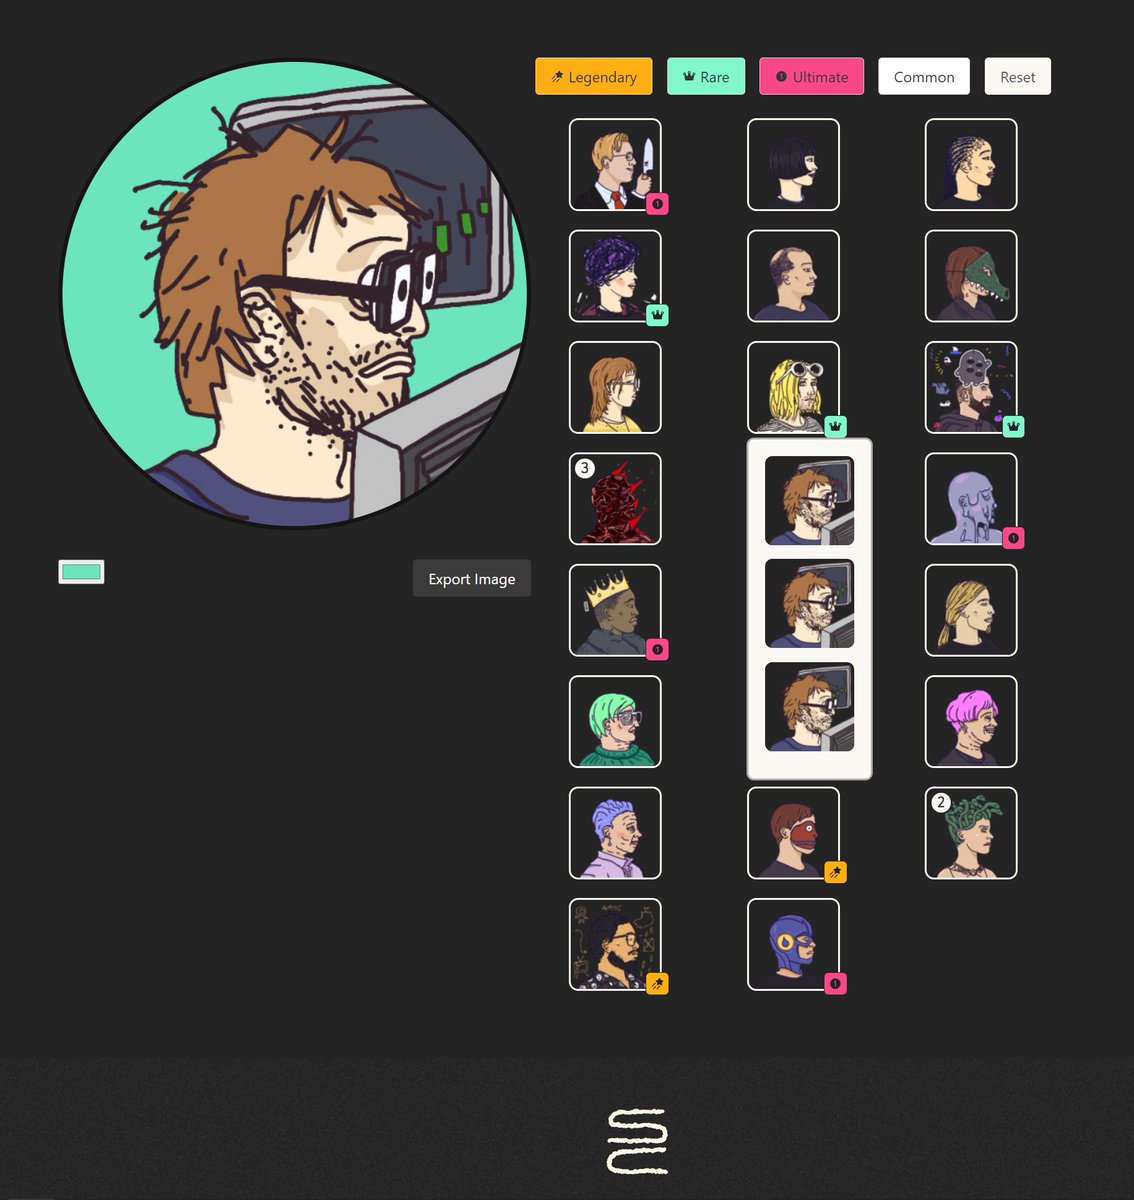 GM

I'm currently working at a fun UI to generate a good quality PFP with custom frame and background color for the Barbershop PFP project on @drip_haus ✊

Still plenty work to do but it's very rewarding.

dm me if you would like to test the page!